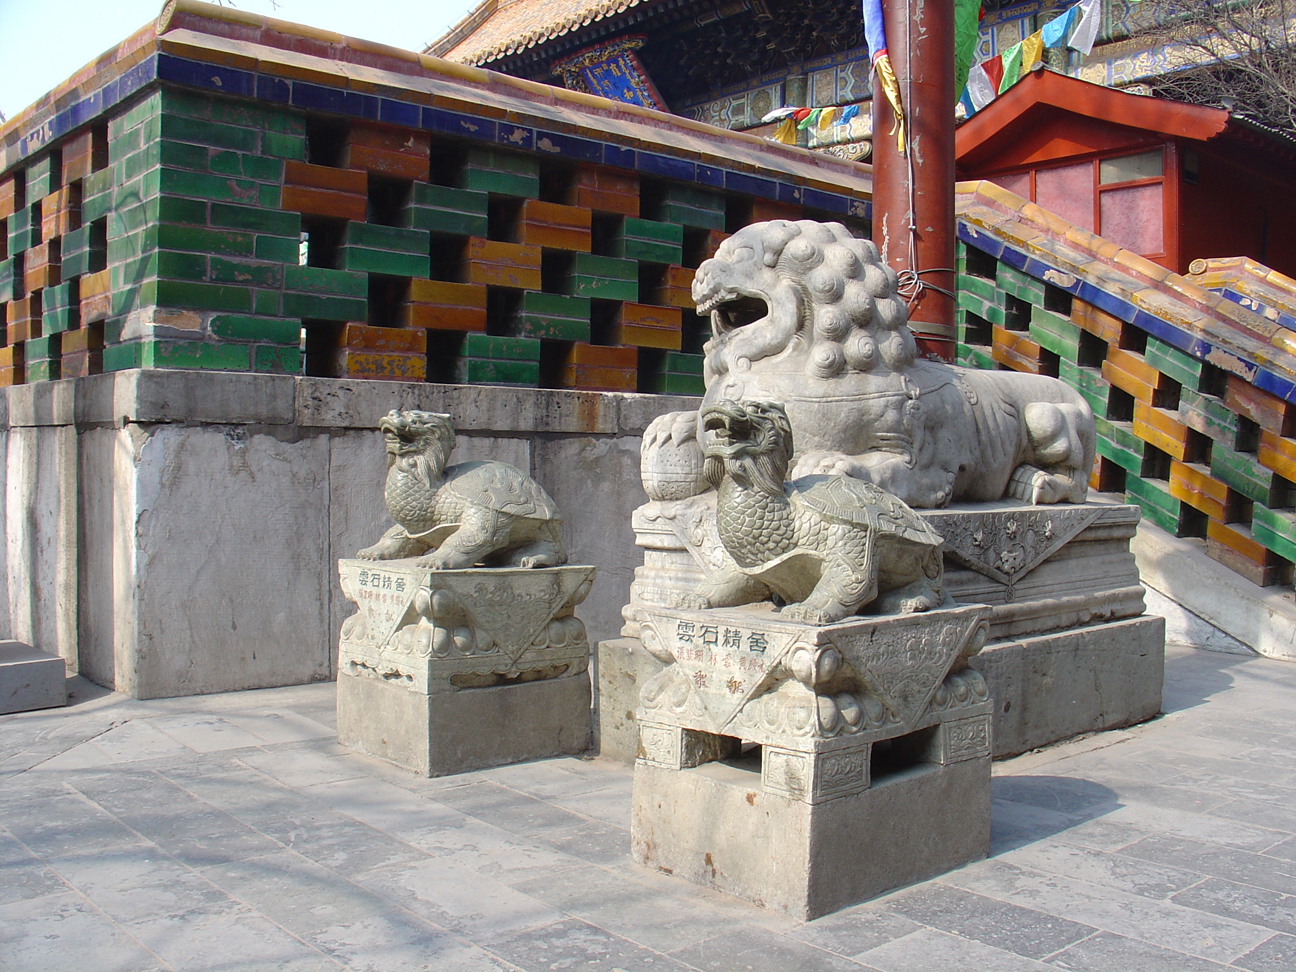 A statue in the Yonghe Temple